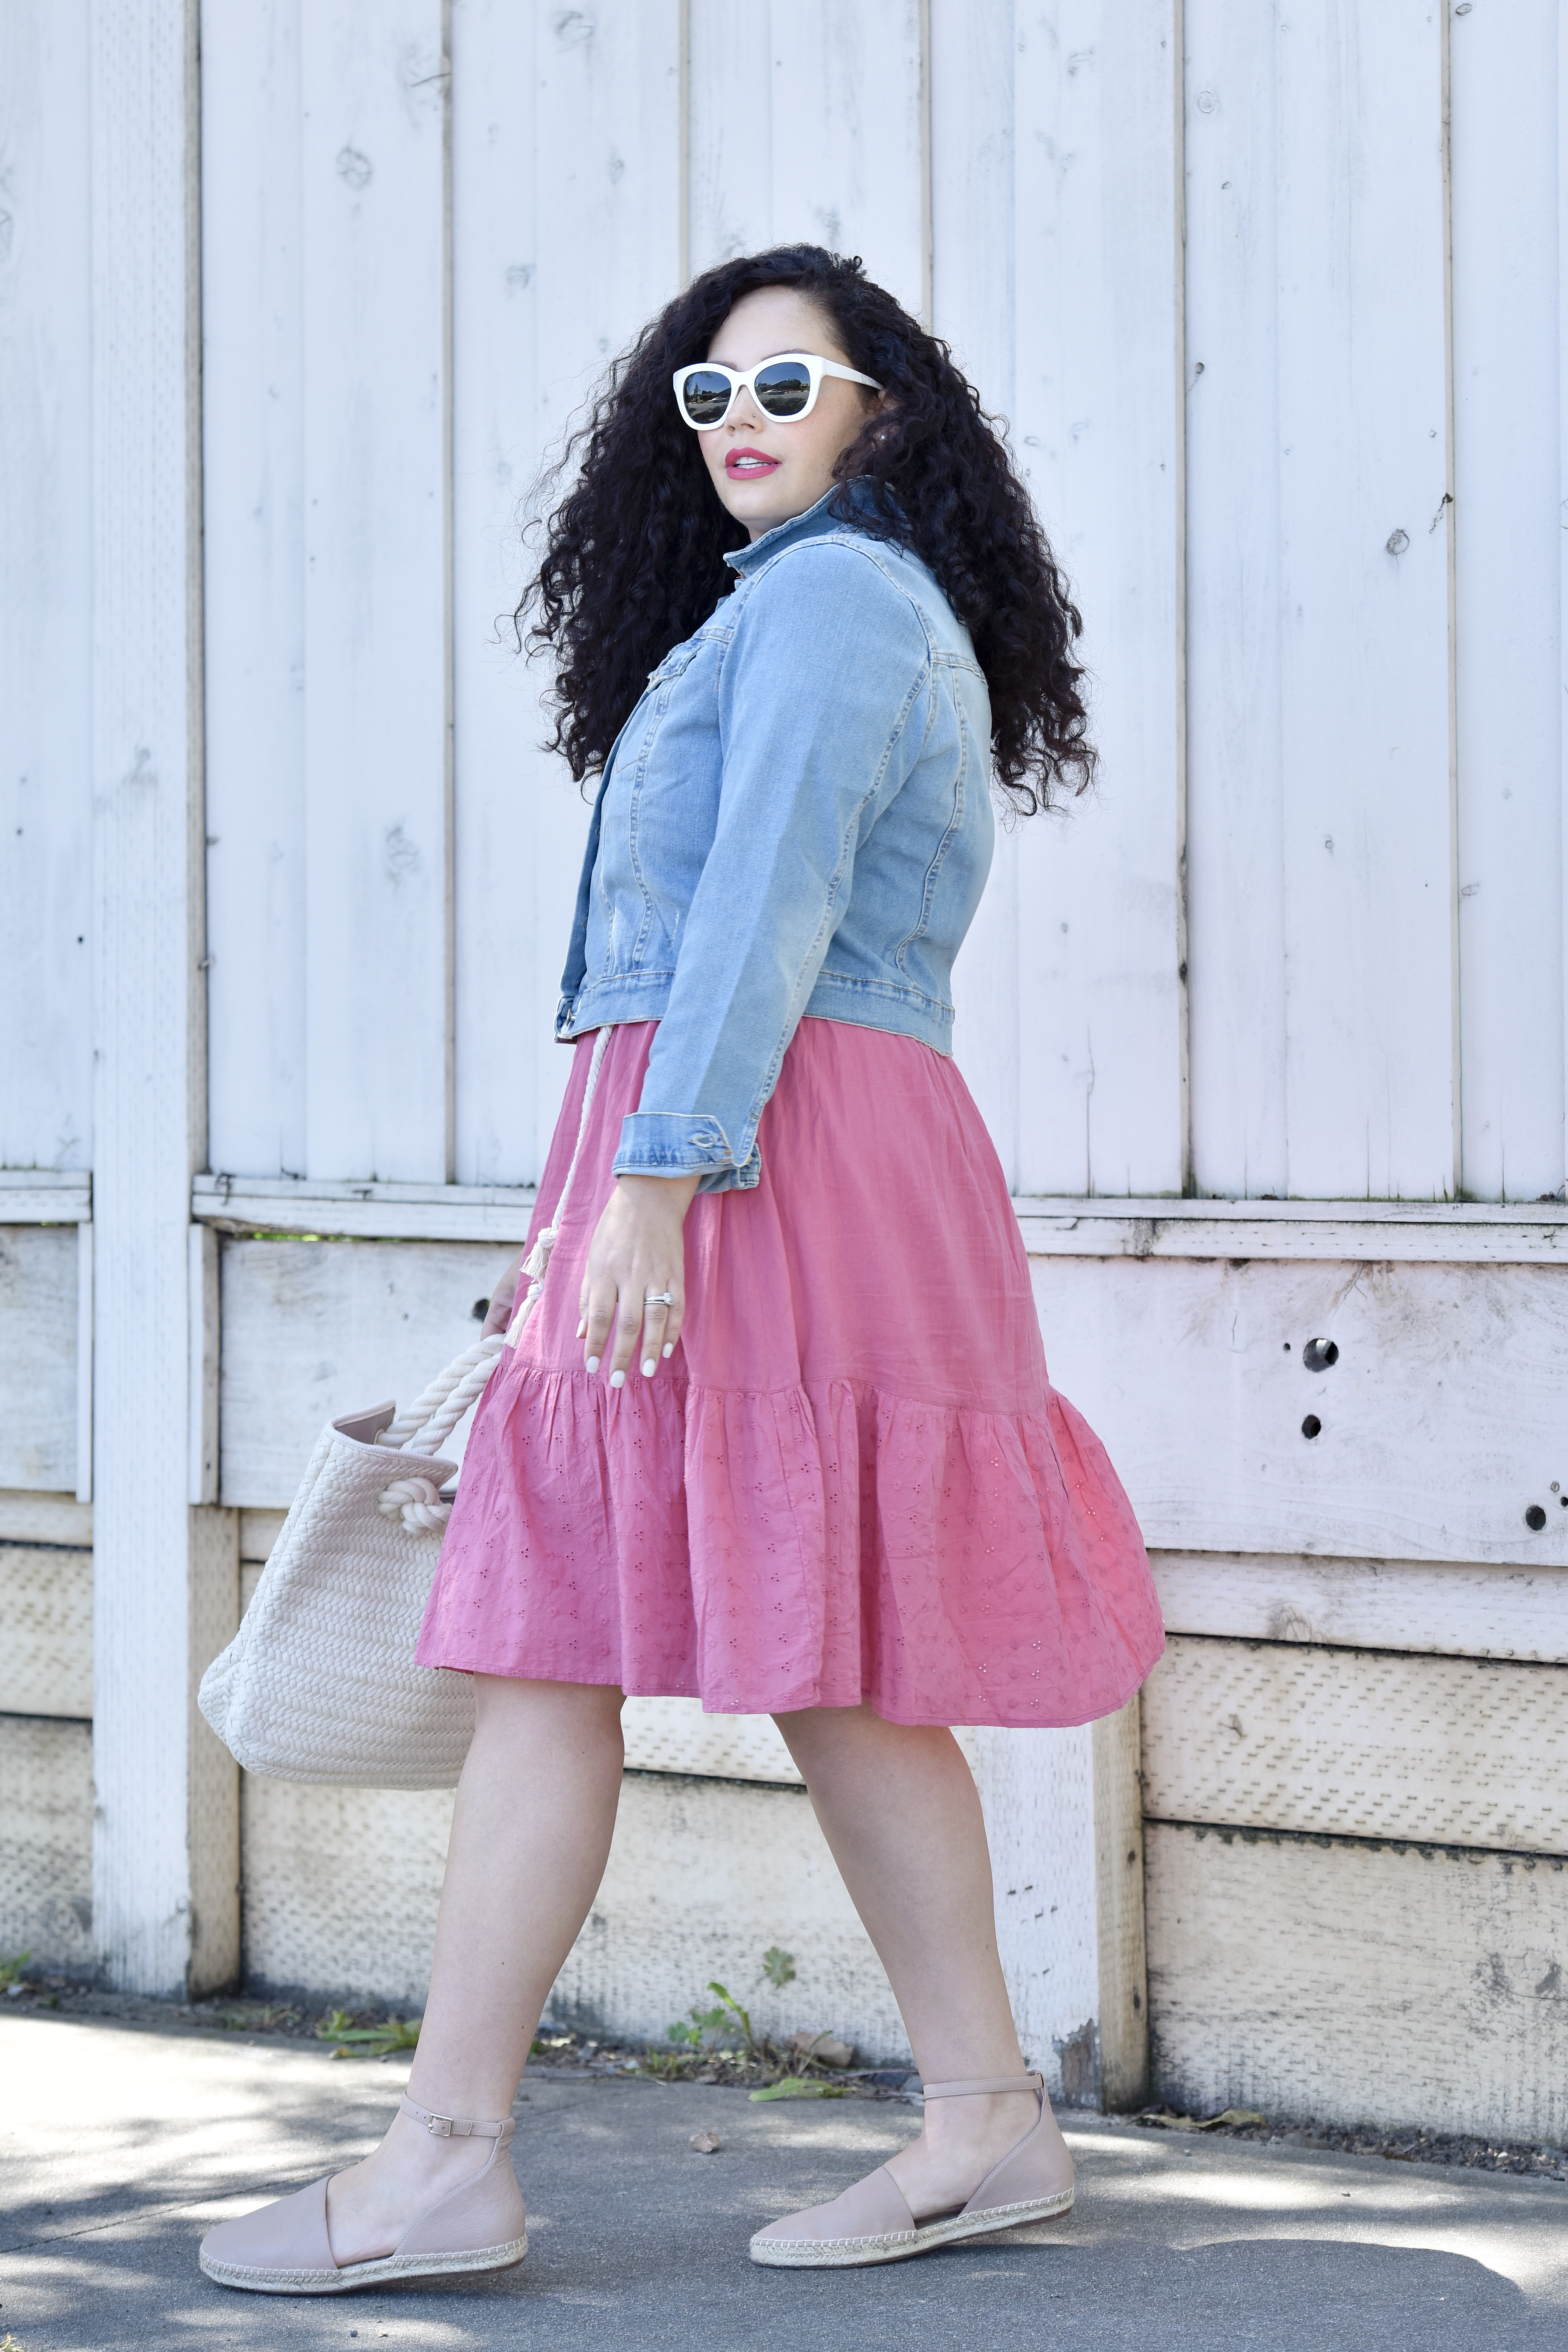 3 Espadrille Styles to Wear Right Now via @GirlWithCurves #shoes #summer